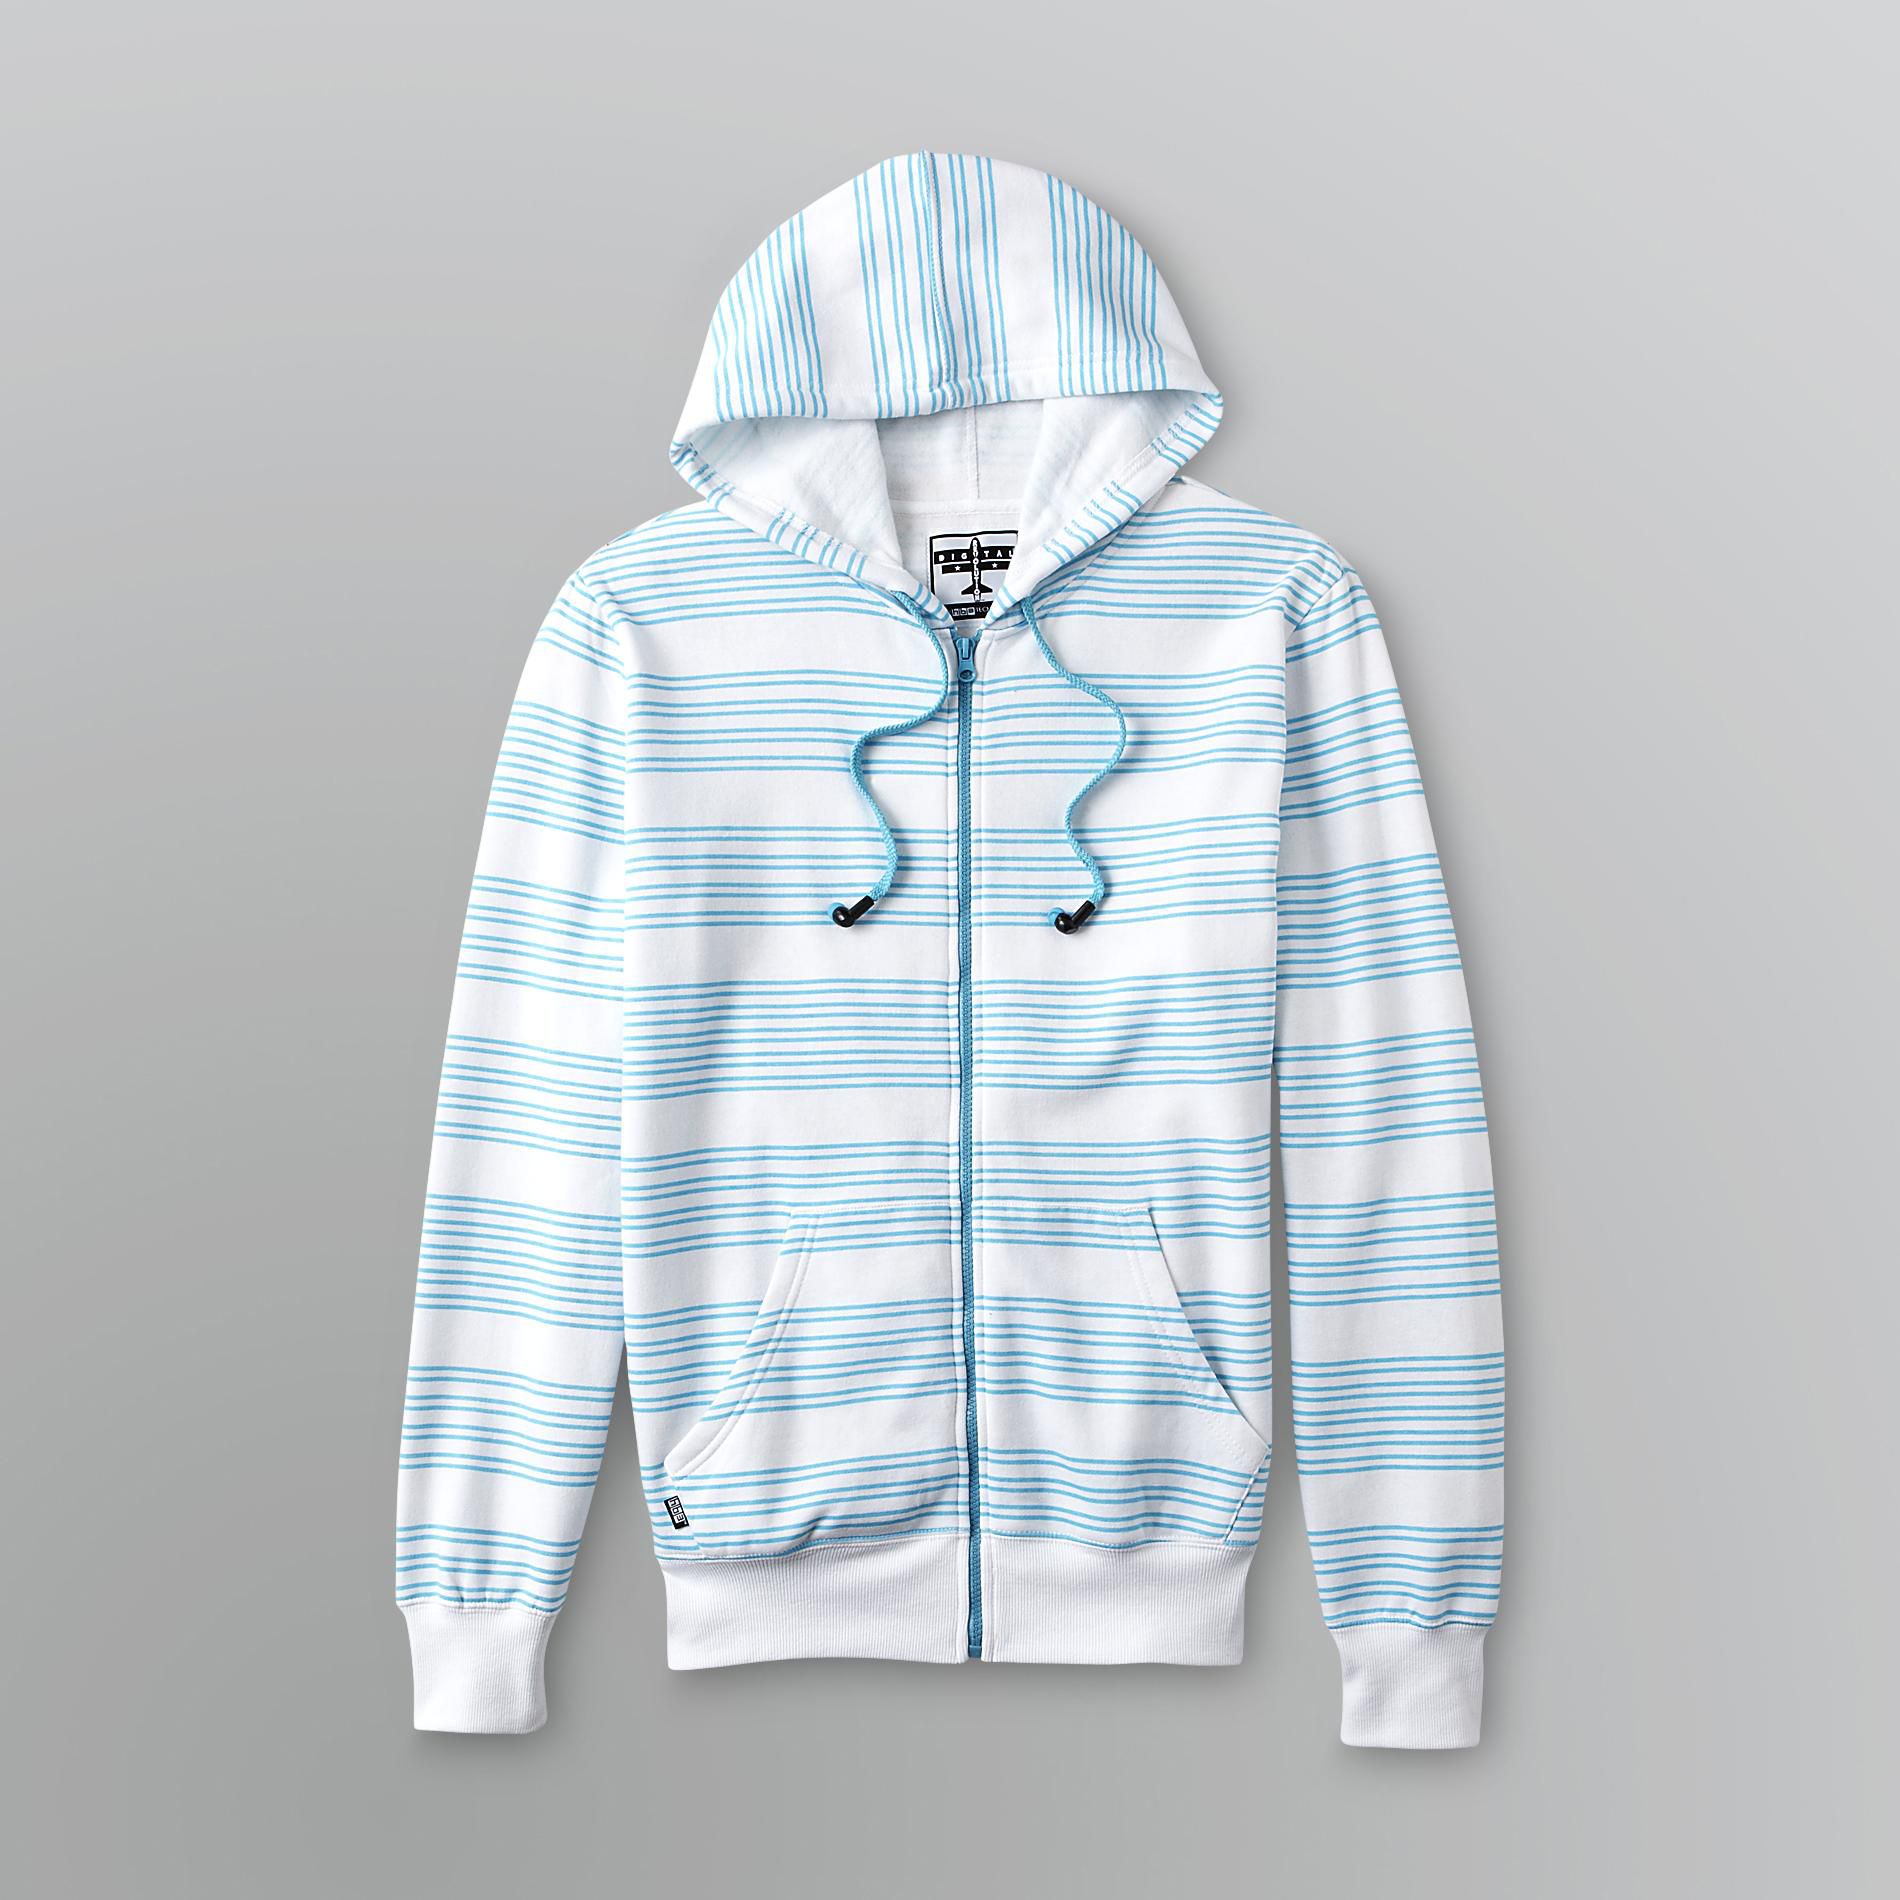 Digital Revolution with HB3 Technology Striped Hoodie